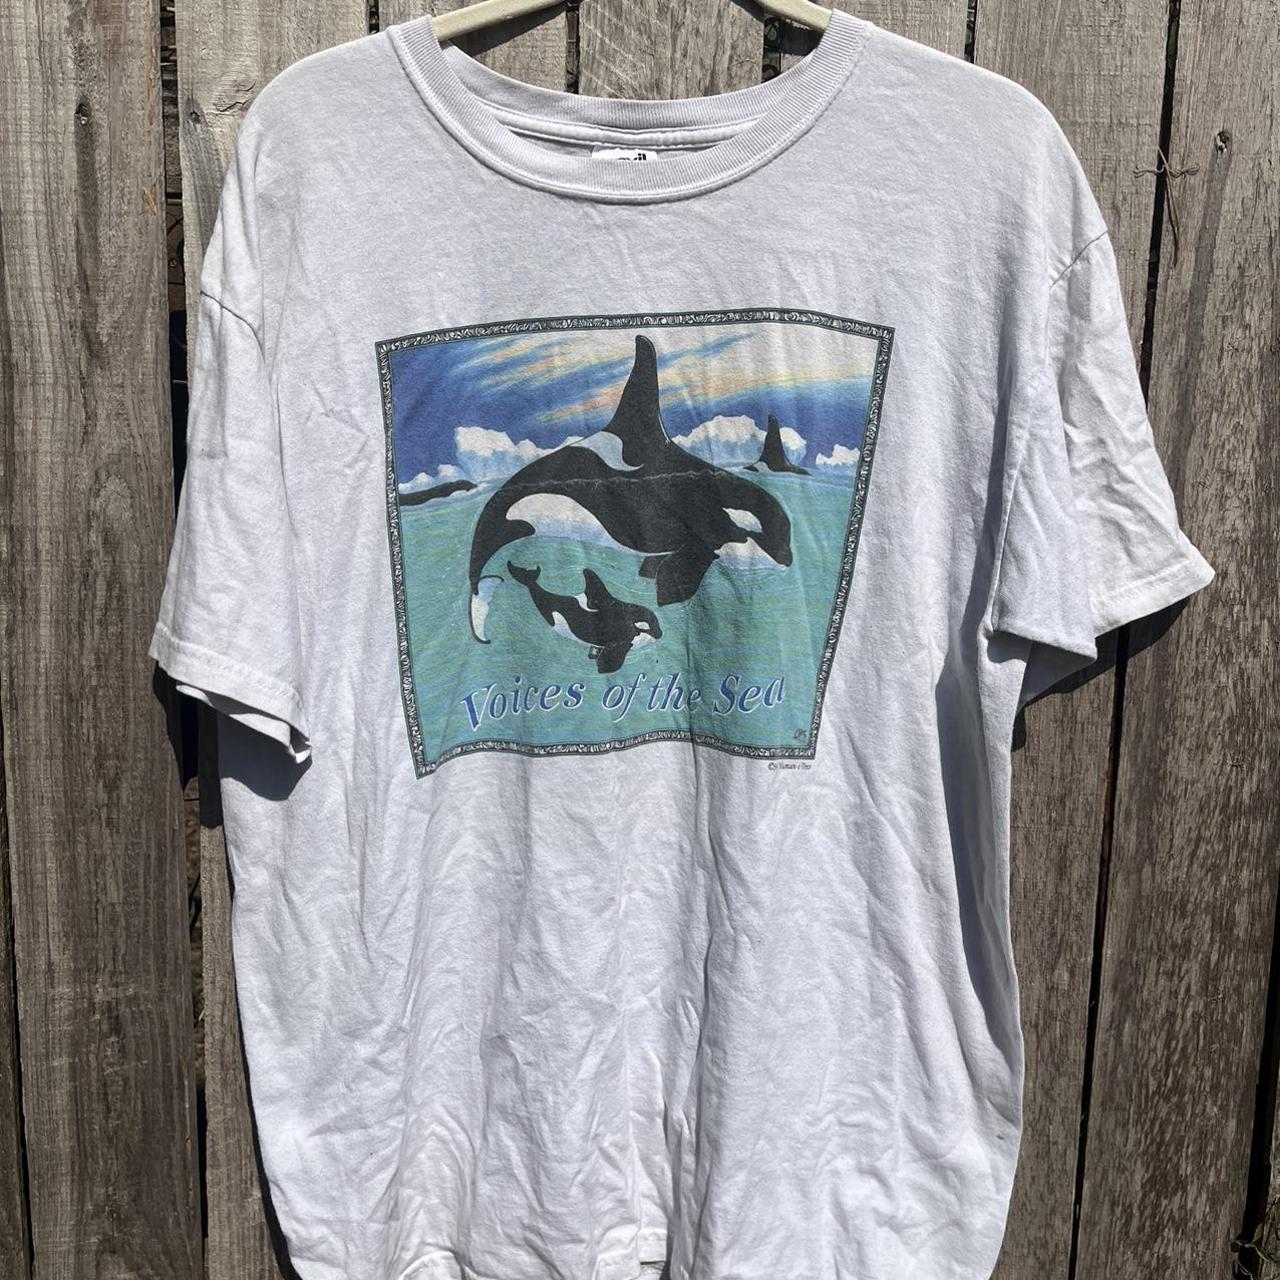 #Vintage Human-i-Tees “Voices of the Sea” on an... - Depop